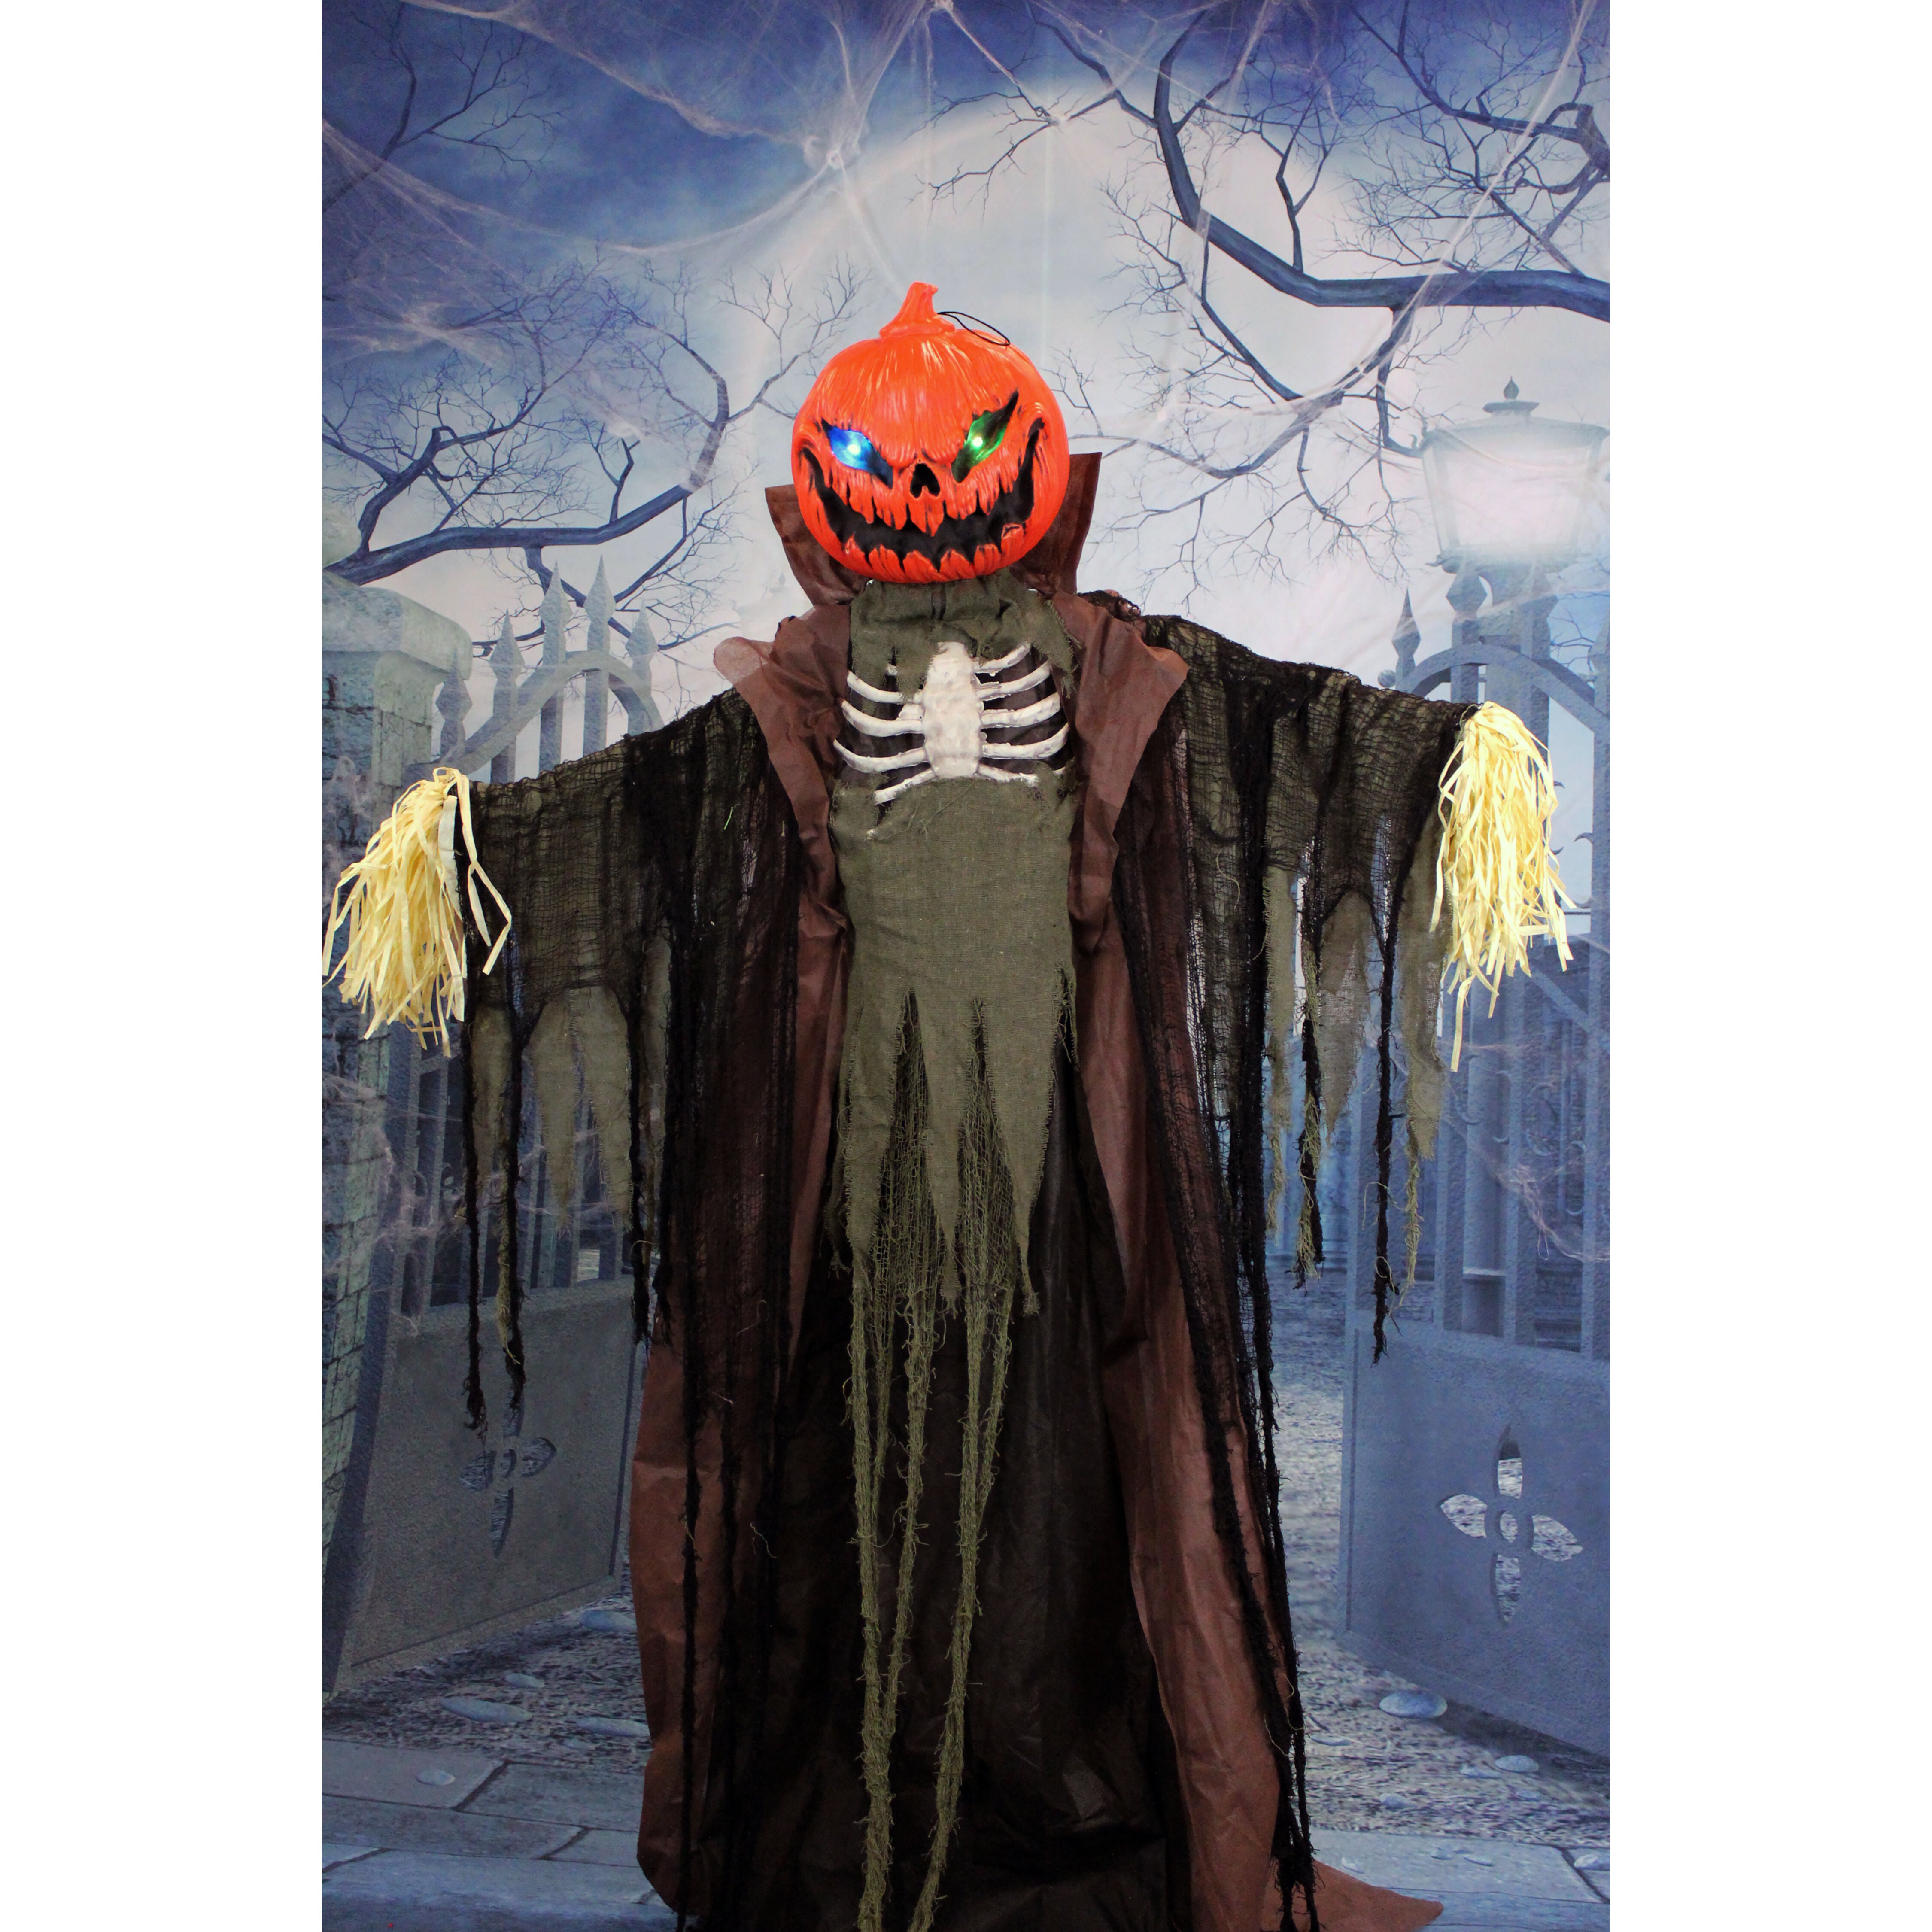 Haunted Hill Farm -  Life-Size Animatronic Scarecrow, Indoor/Outdoor Halloween Decoration, Flashing Colorful Eyes, Poseable